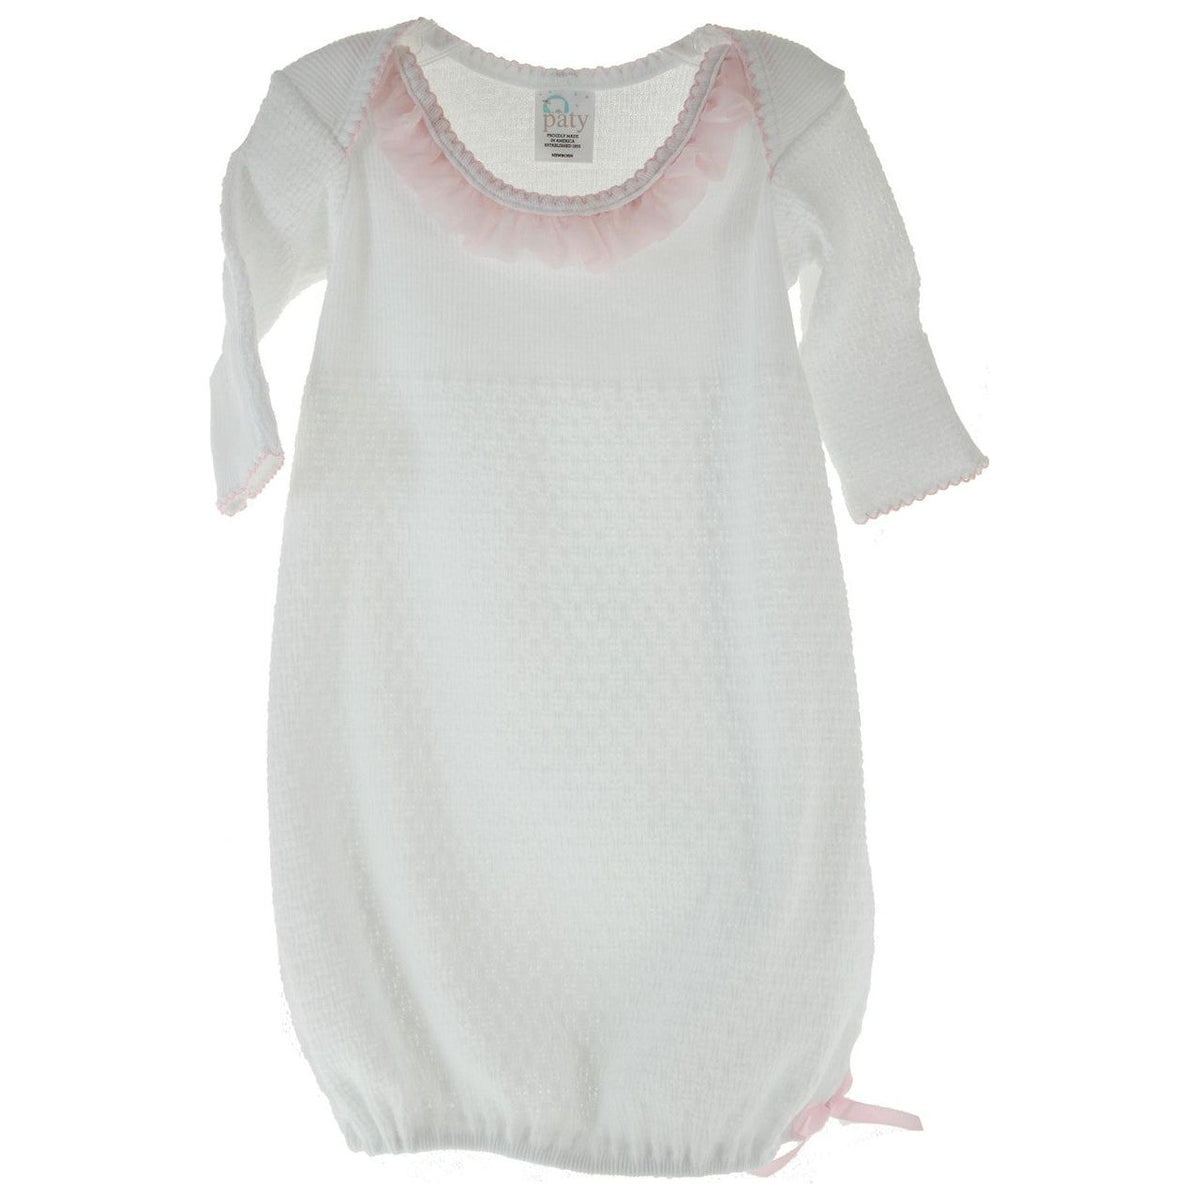 Baby Girls Knitted Layette Gown White Pink Ruffle Trim